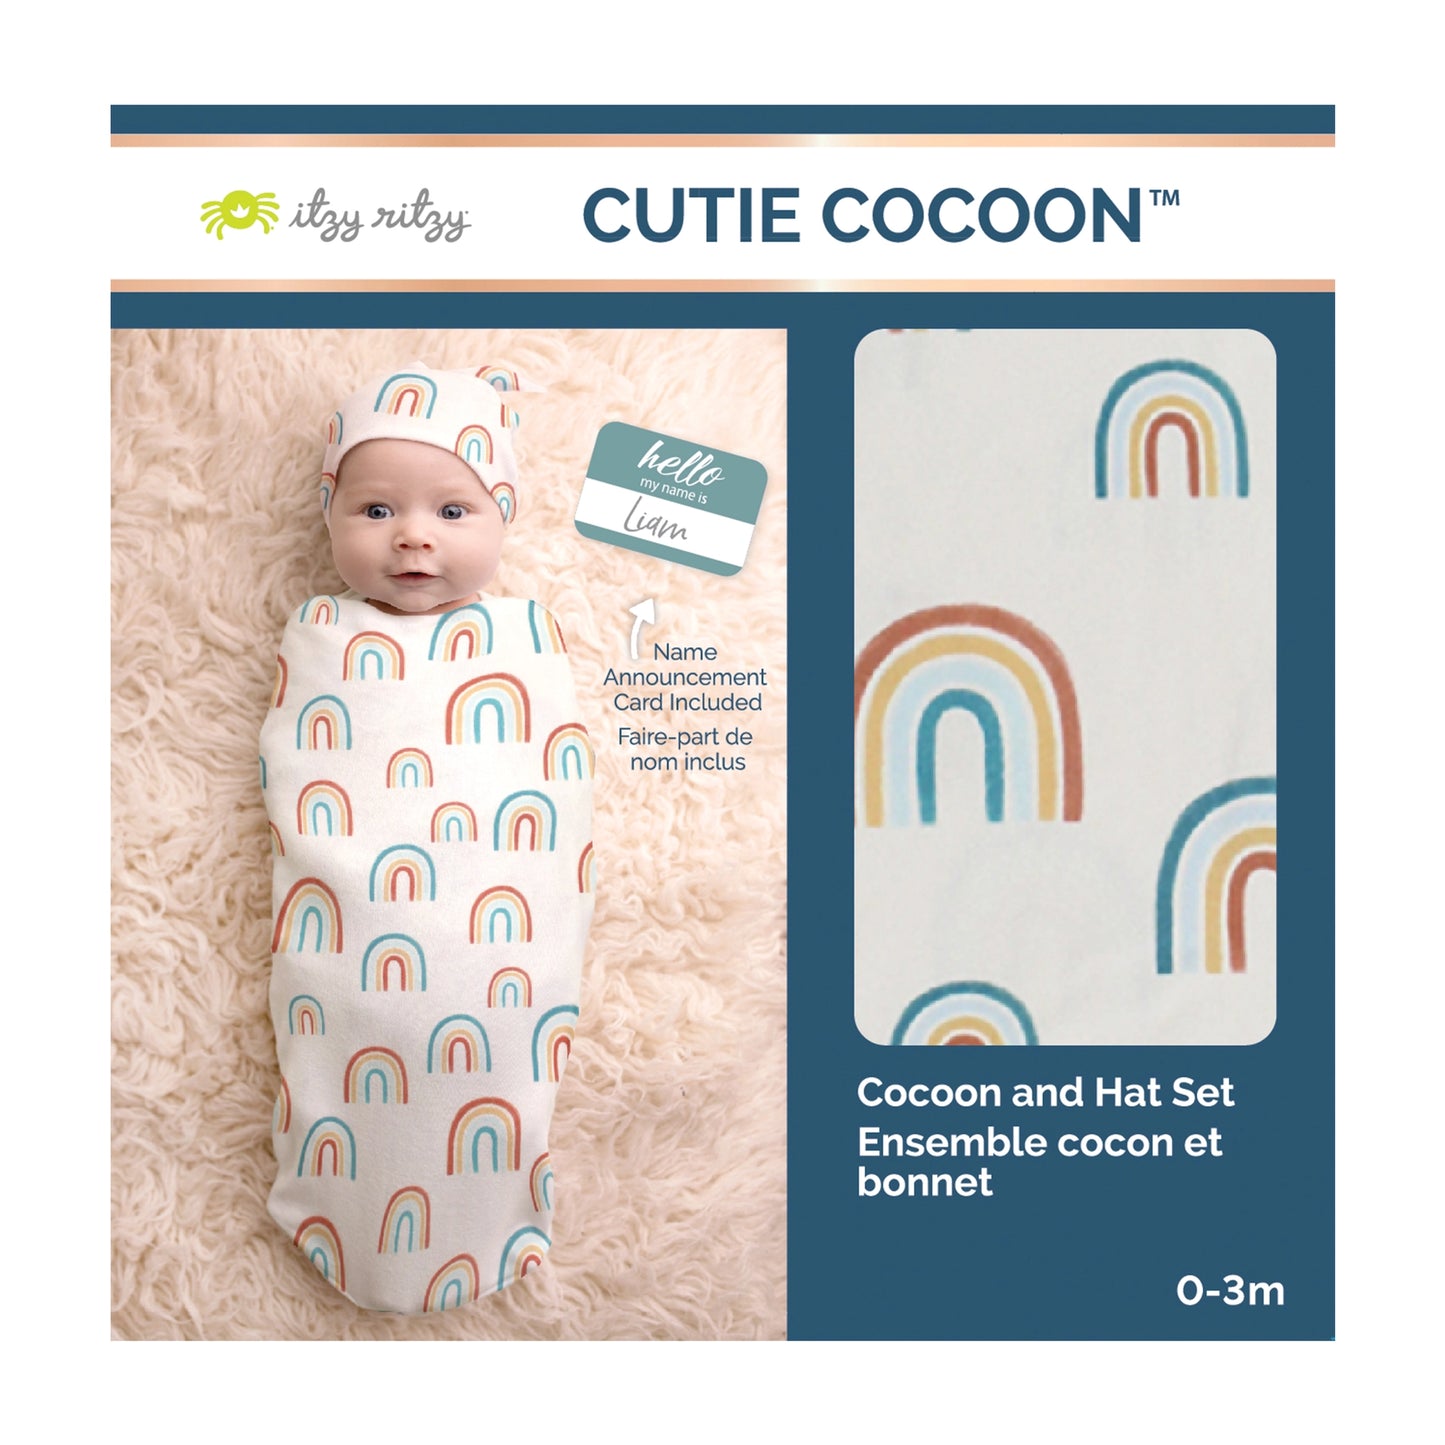 Cutie Cocoon Matching Cocoon & Hat Set (Over the Rainbow)